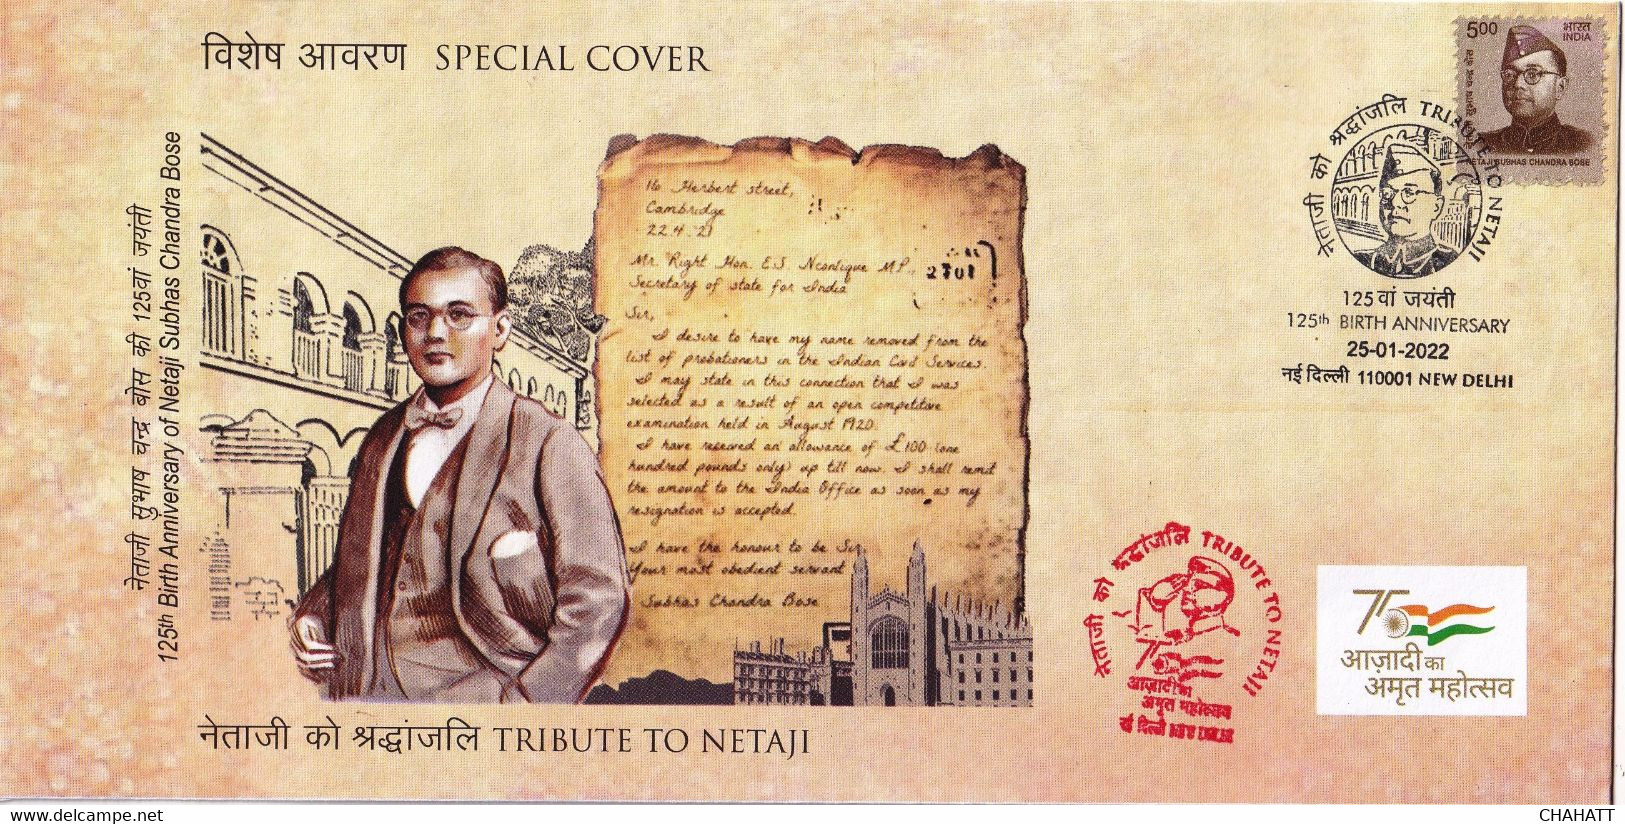 INDIA-NETAJI BOSE- SMALL COLLECTION OF 4 SPECIAL COVERS AND 2 PPC -INDIA-2022 -LIMITED ISSUE- BX2-44